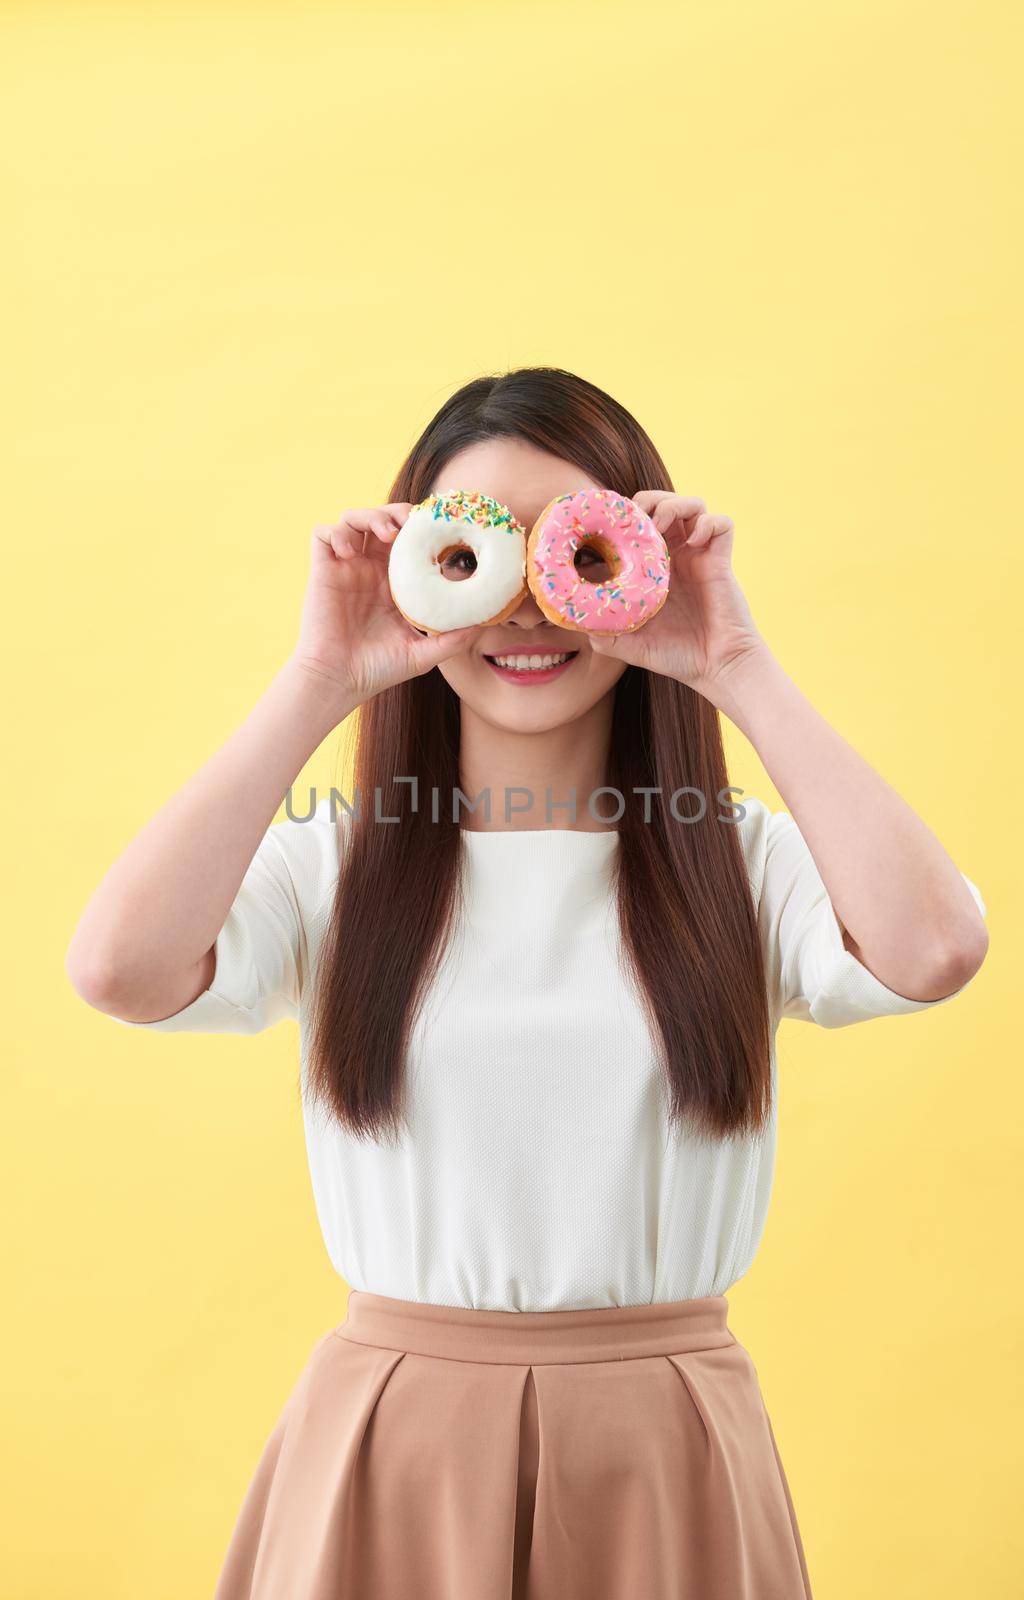 Beauty fashion model girl taking sweets and colorful donuts by makidotvn